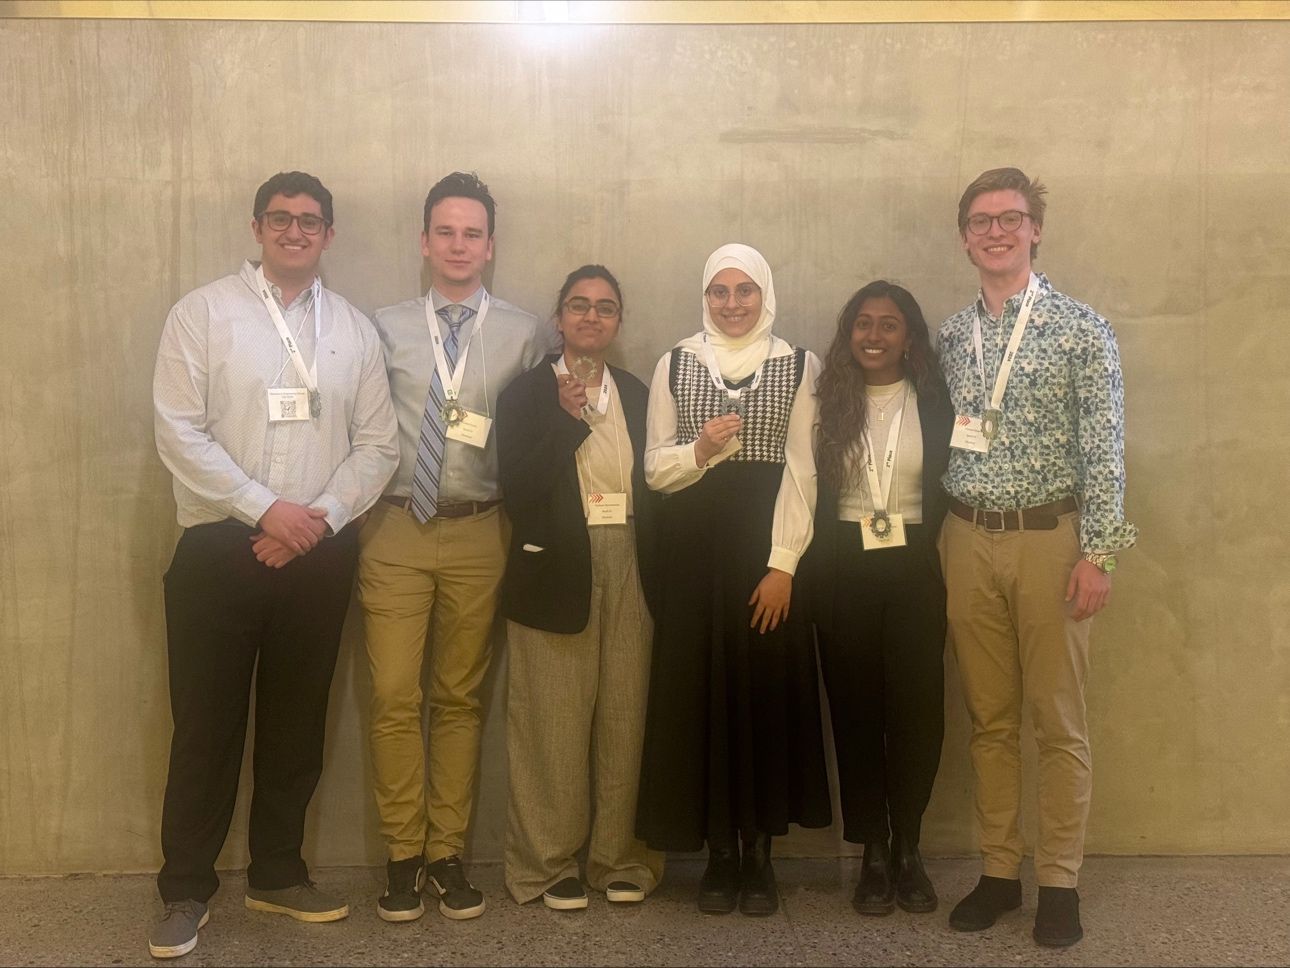 Cortisol Biosensor Project Wins Silver Medal at Engineering Capstone